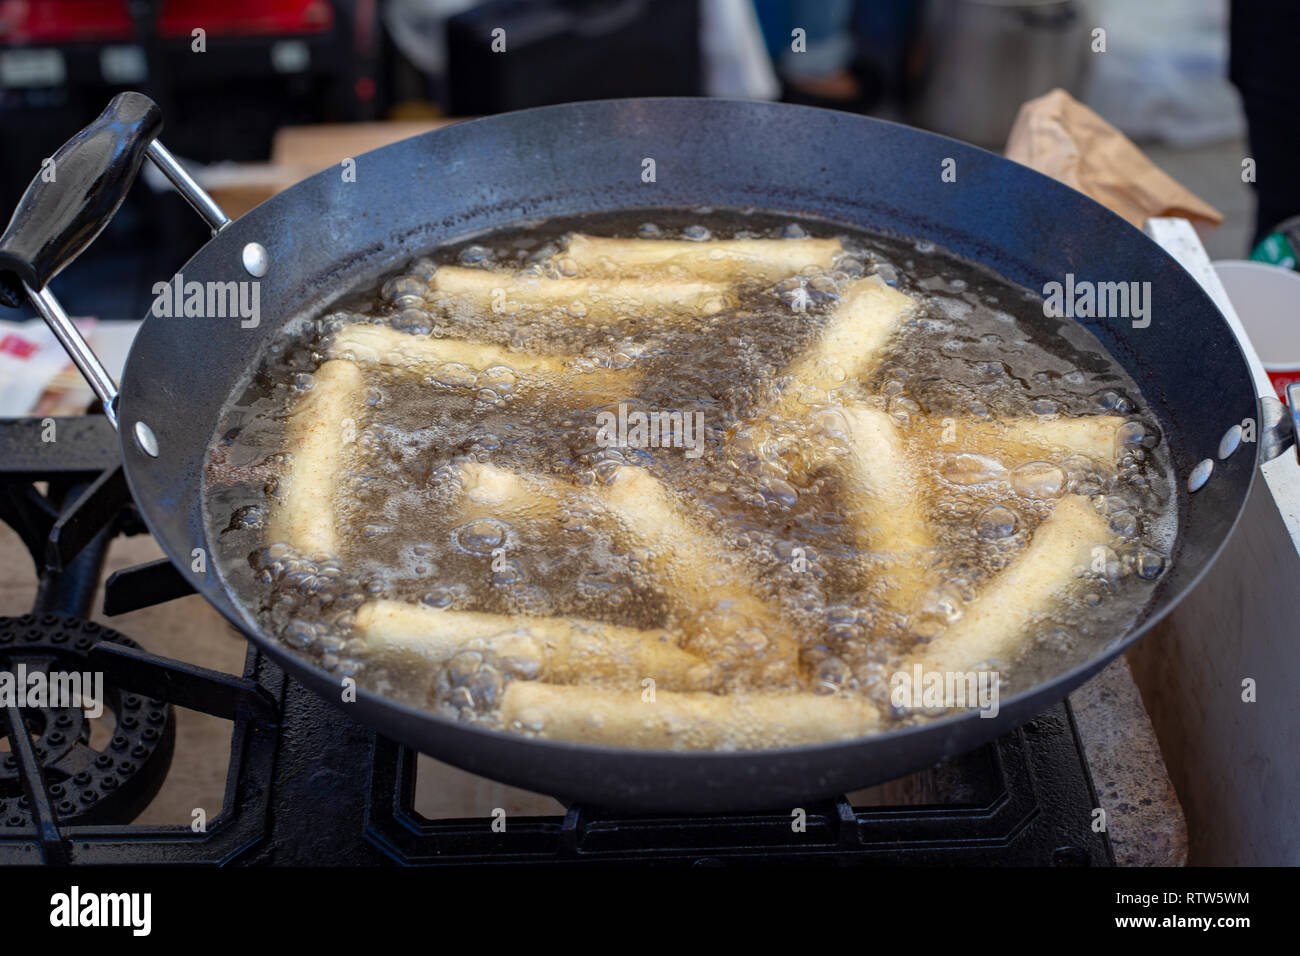 Spring rolls deep frying in hot boiling oil in a wok Stock Photo